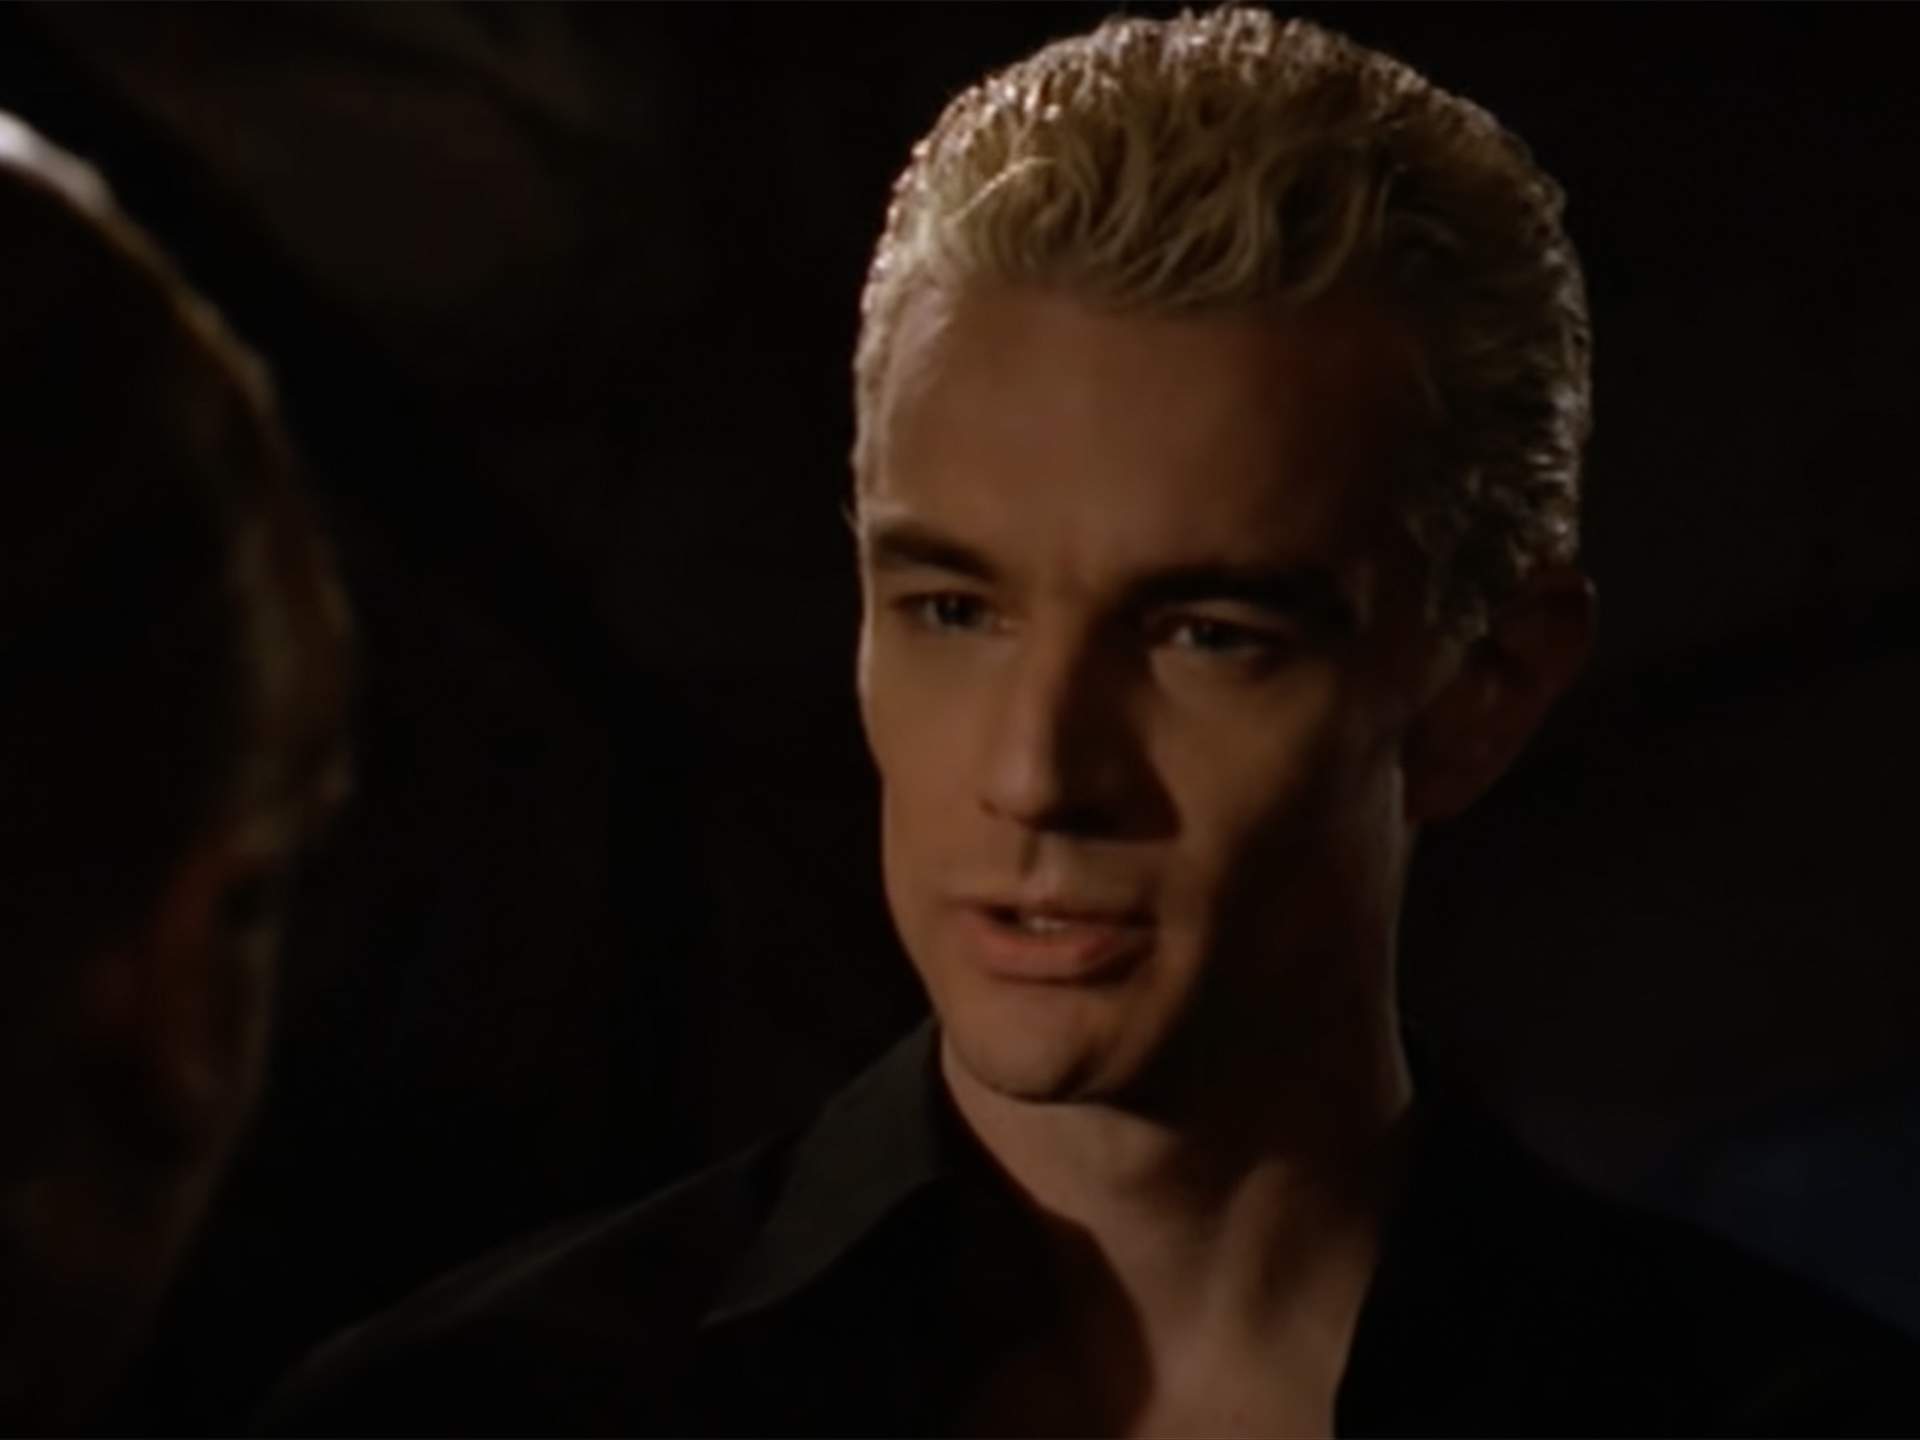 listen, did I intend to dress like Spike from Buffy The Vampire